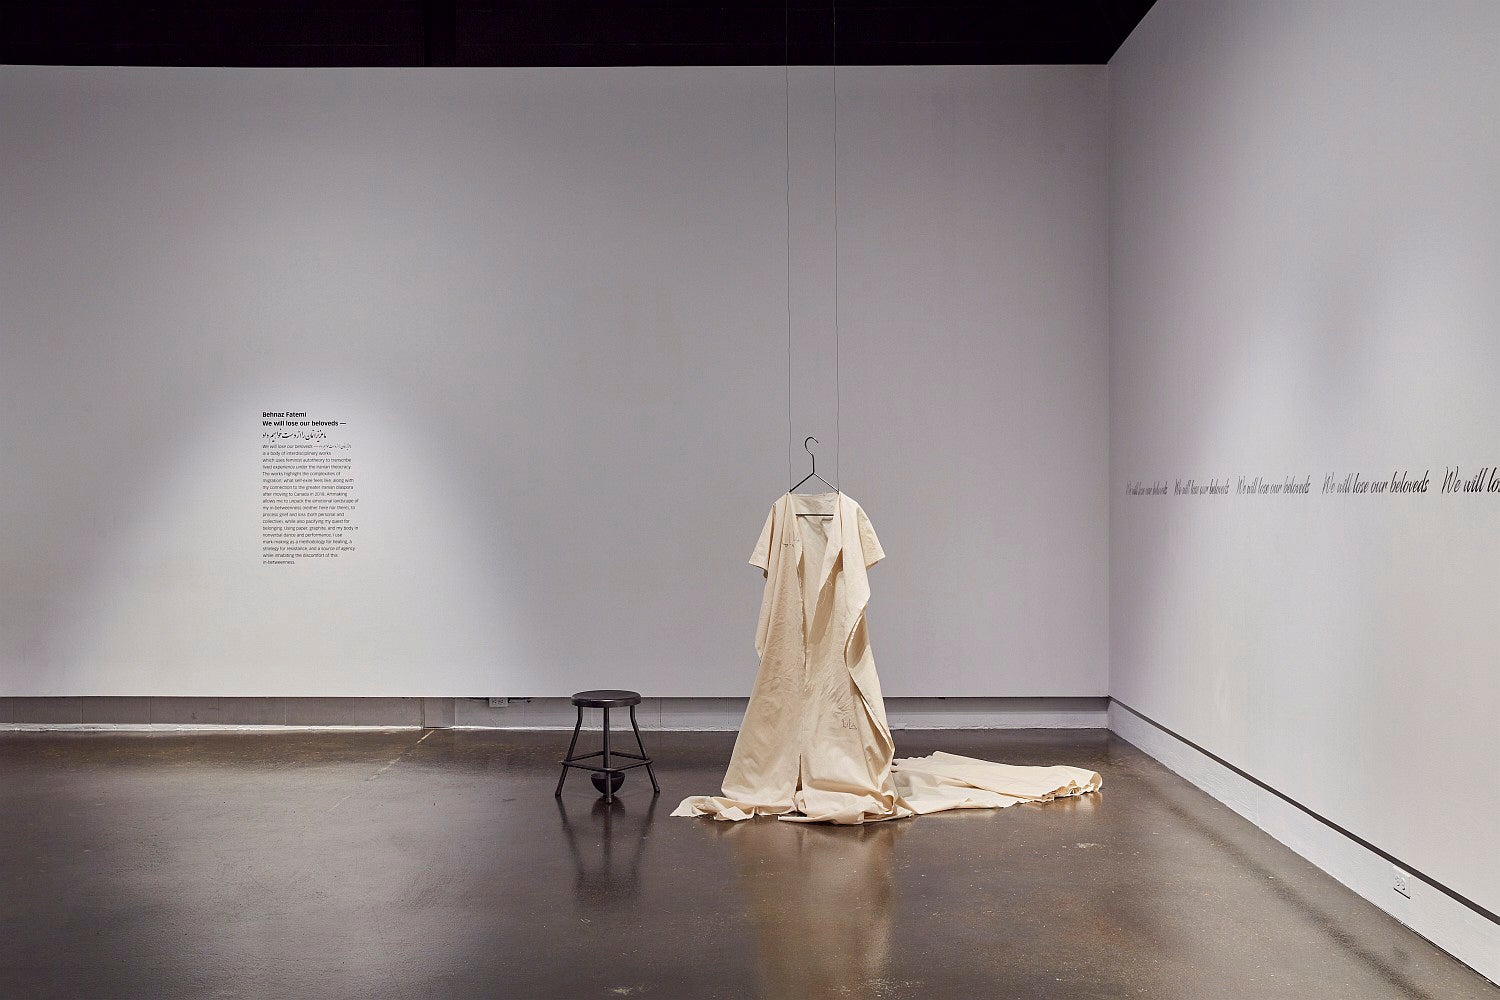 Art gallery exhibition text running along the wall, a canvas dress is hung from the ceiling with a blackened stool beside it.